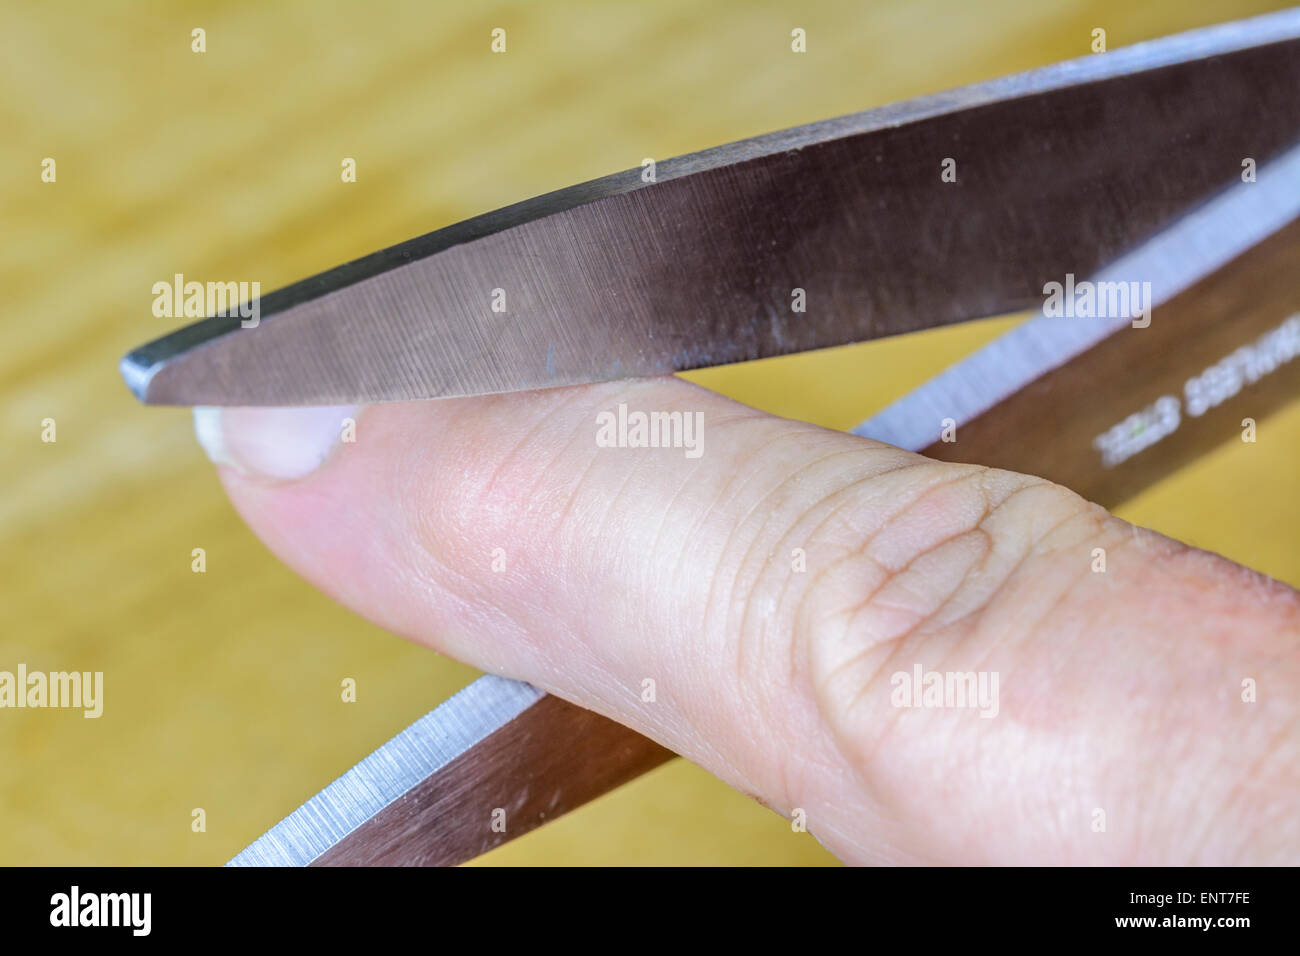 Cutting a finger off with a pair of scissors. Stock Photo